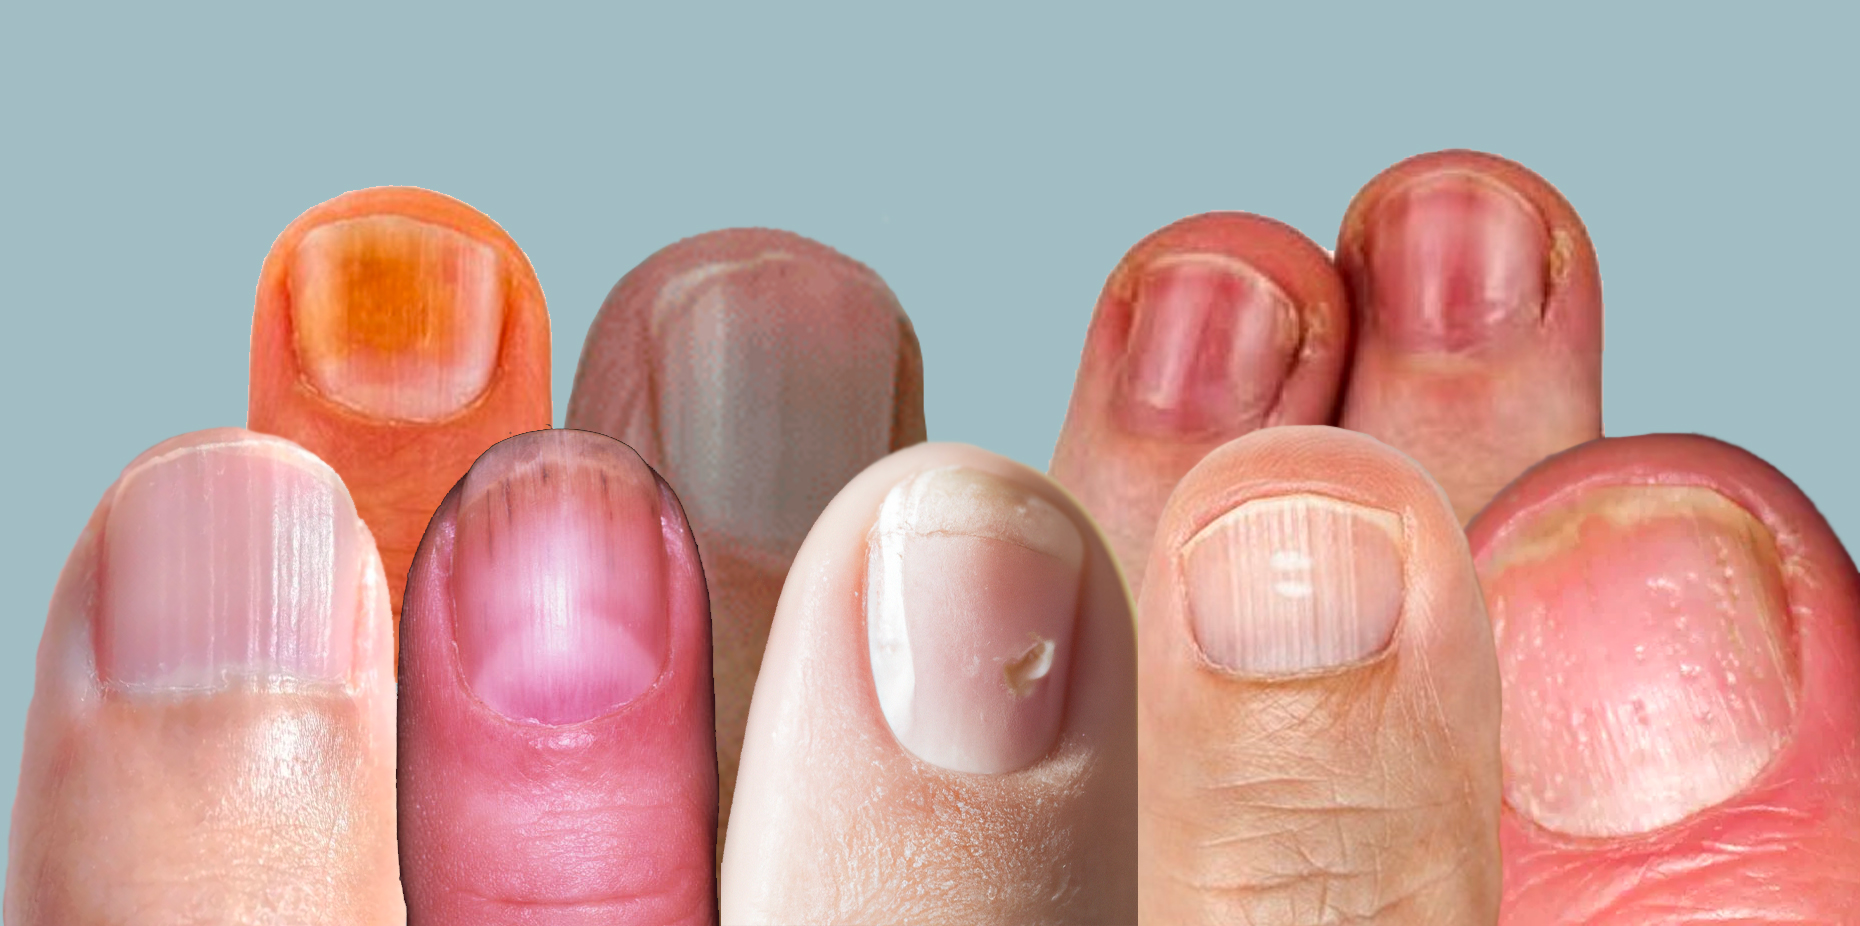 Nail Health: Problems, Causes, and Treatment